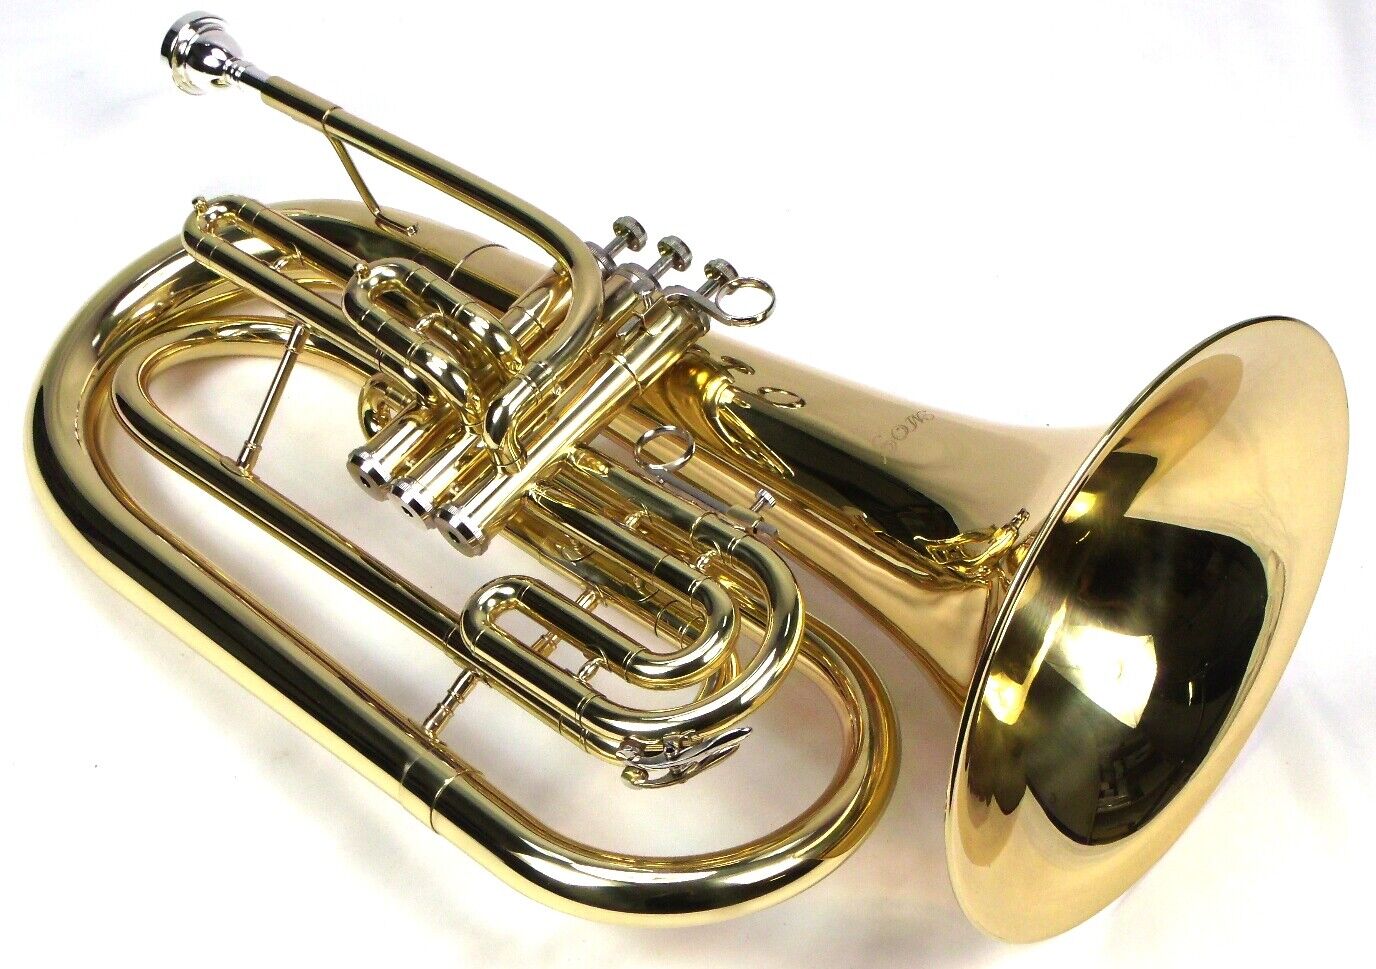 Advanced Monel Pistons Marching Baritone Key of Bb w/ Case Gold Lacquer Finish Moz Does Not Apply - фотография #5